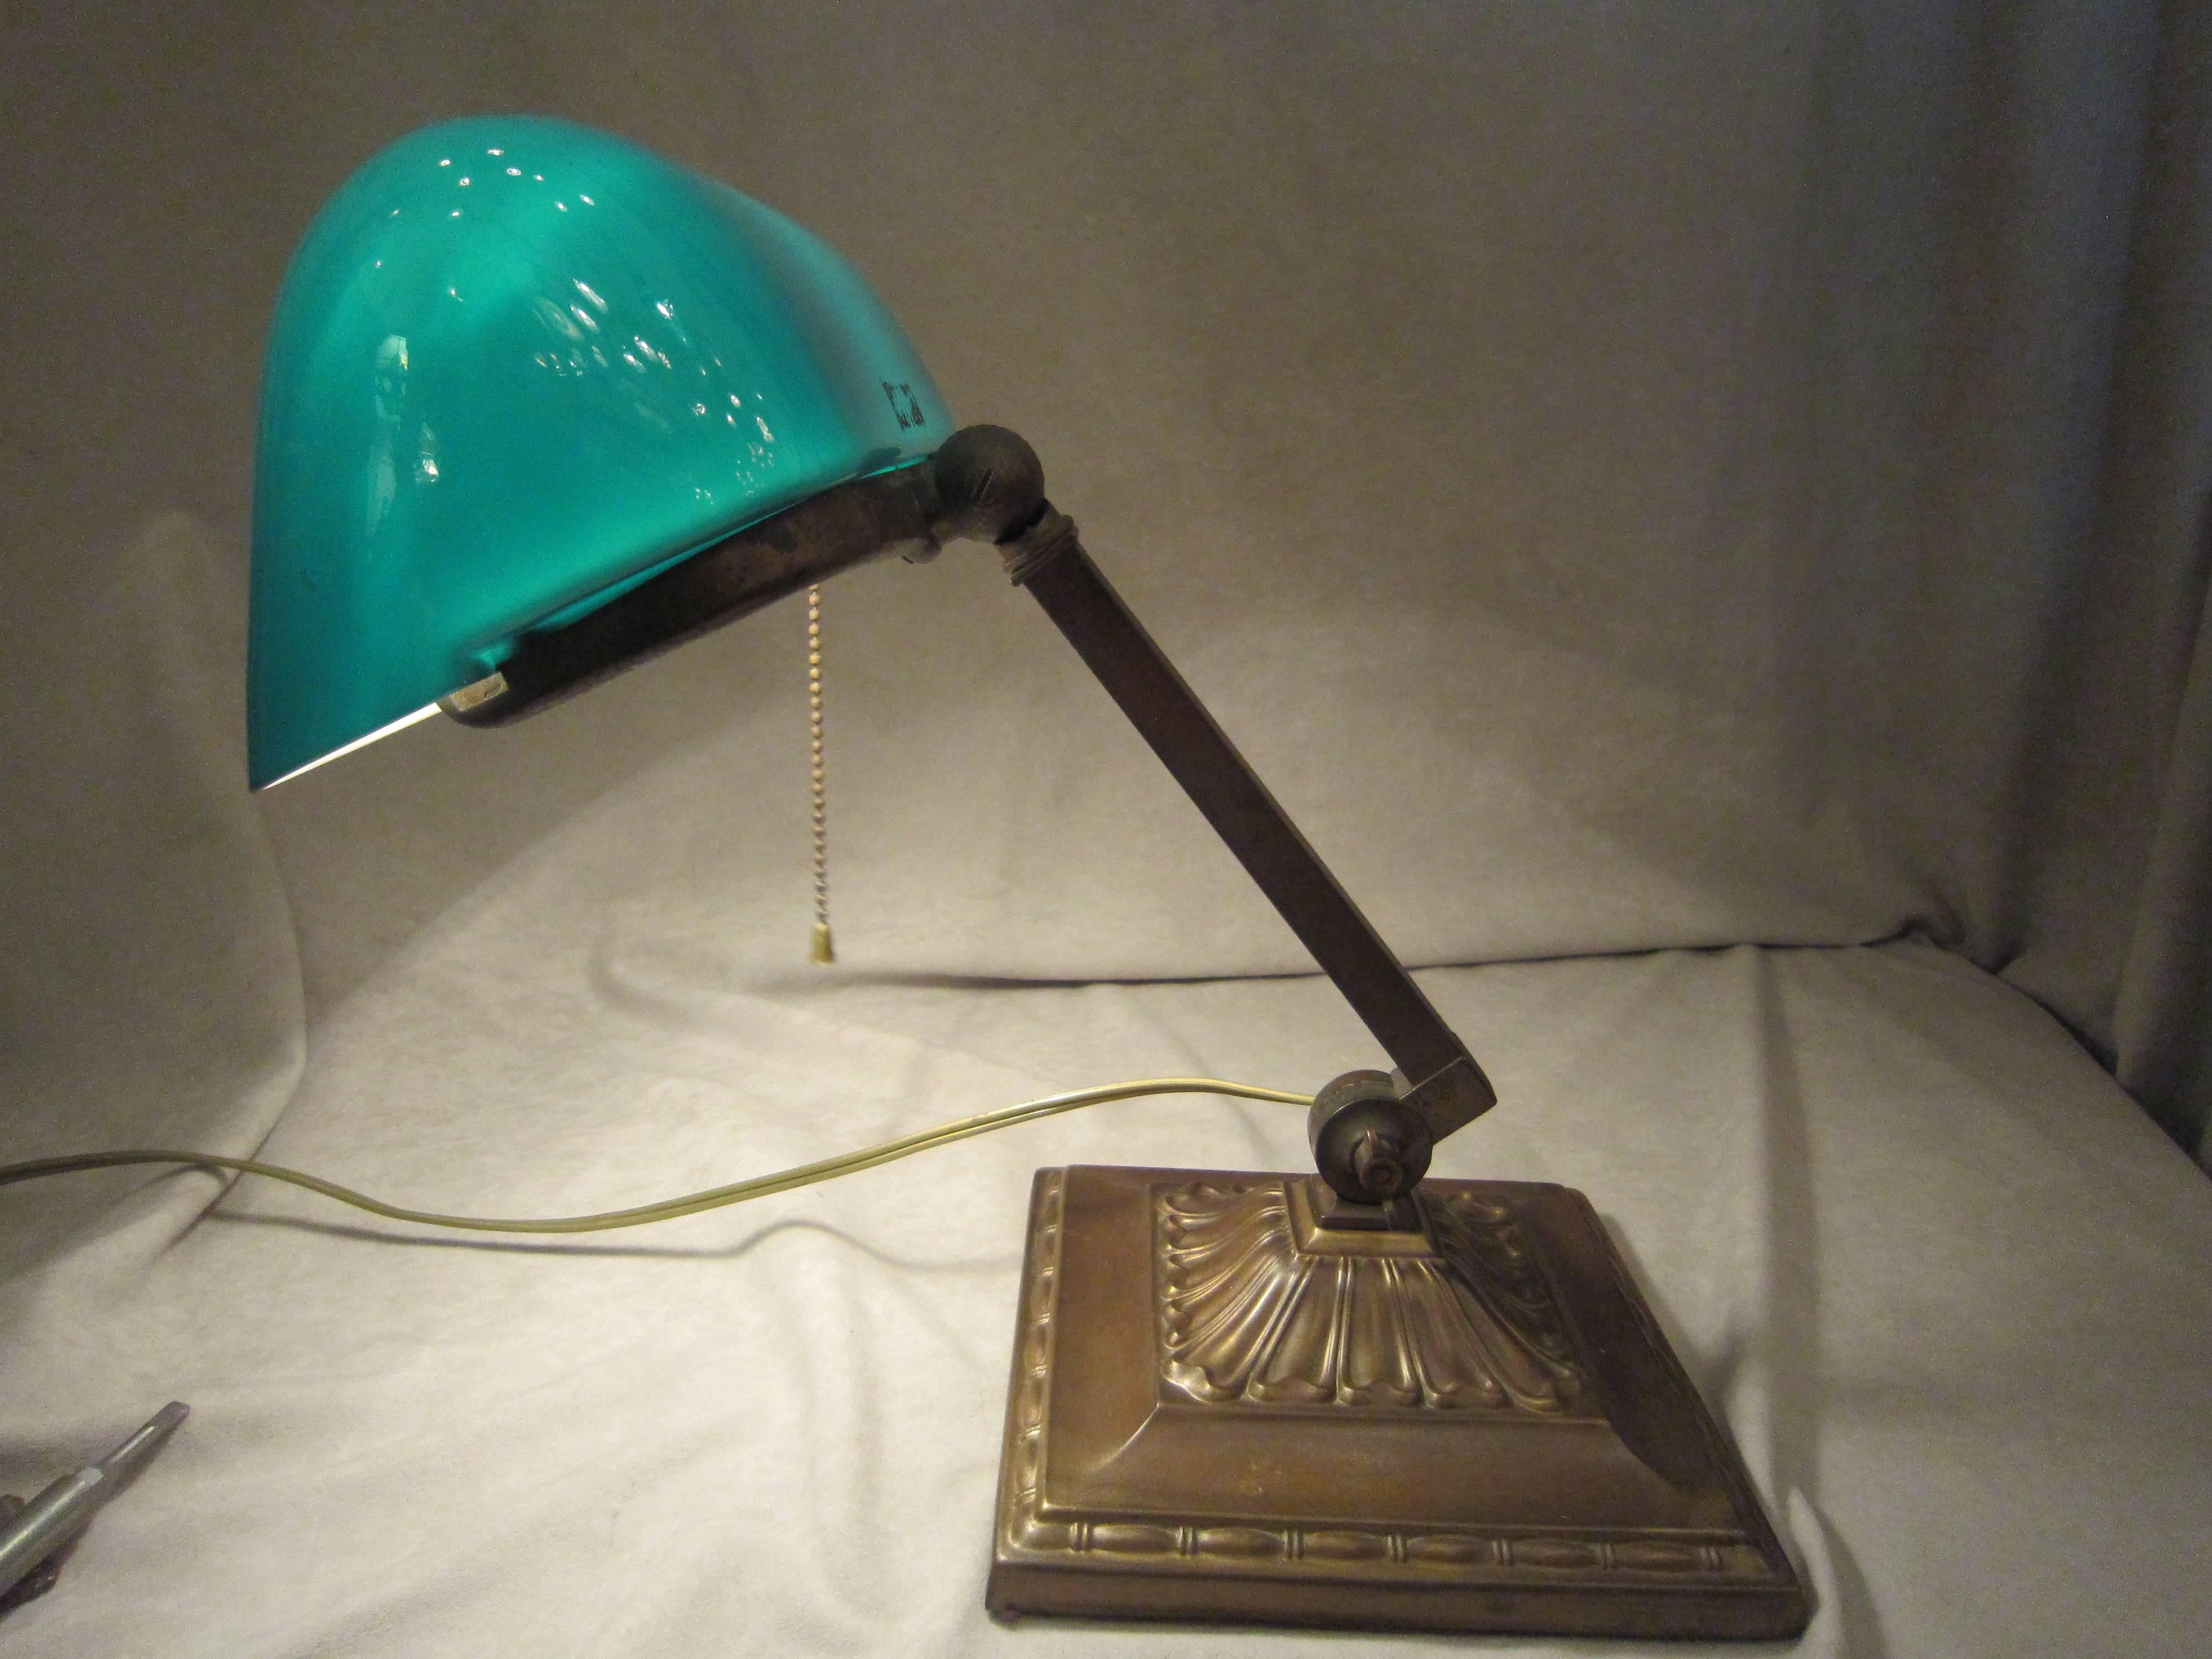 Emeralite was the premiere maker of these bankers lamps. The name signifies quality, and it has become the generic name for bankers lamps. This is a fine signed example of these desirable lamps. The angles can be adjusted in two places. There is a